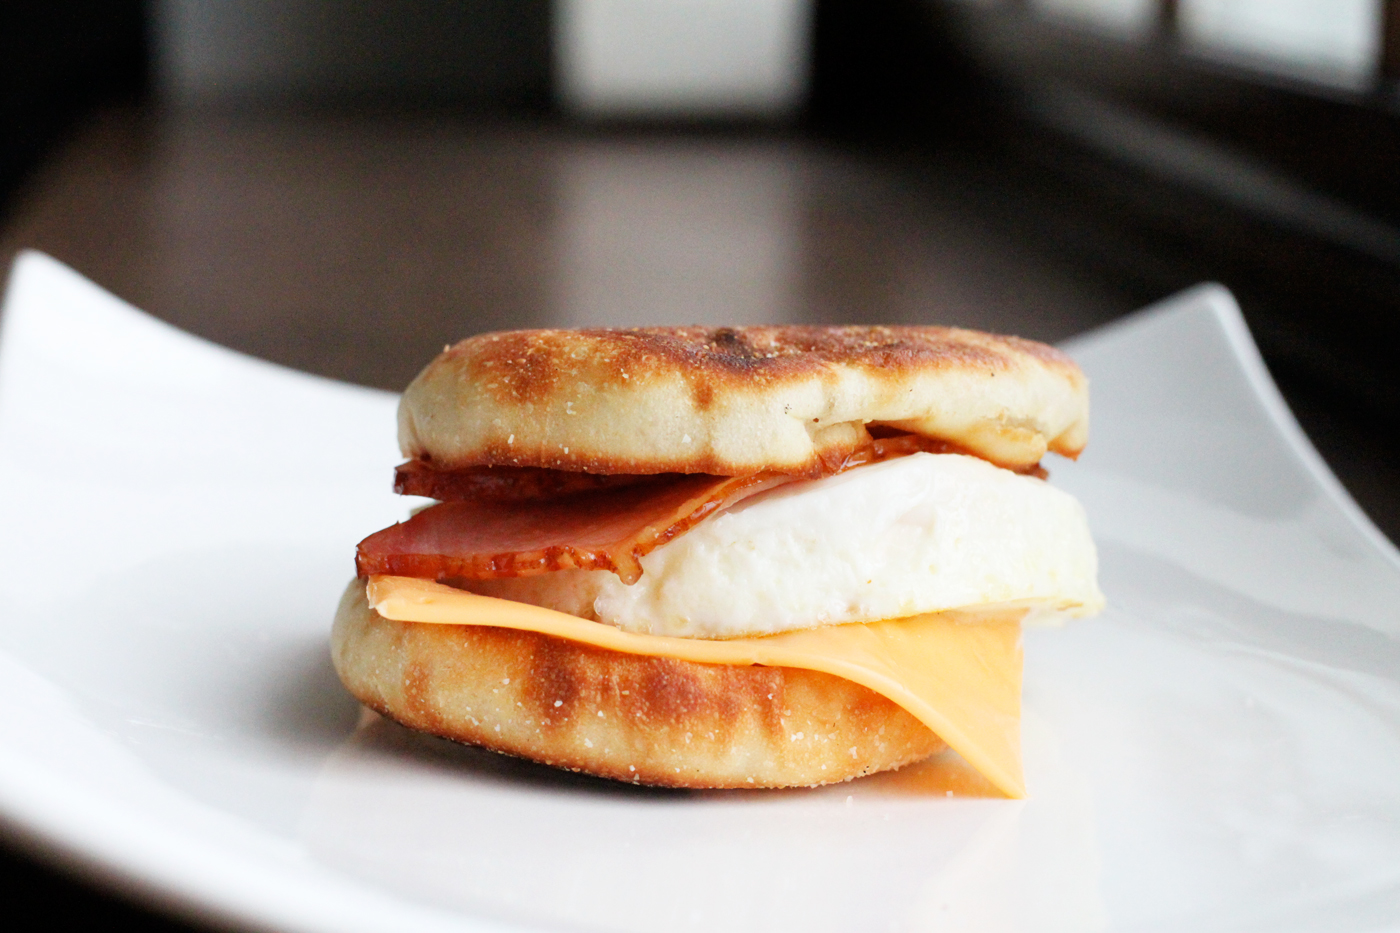 How to easily make the perfect homemade breakfast sandwich